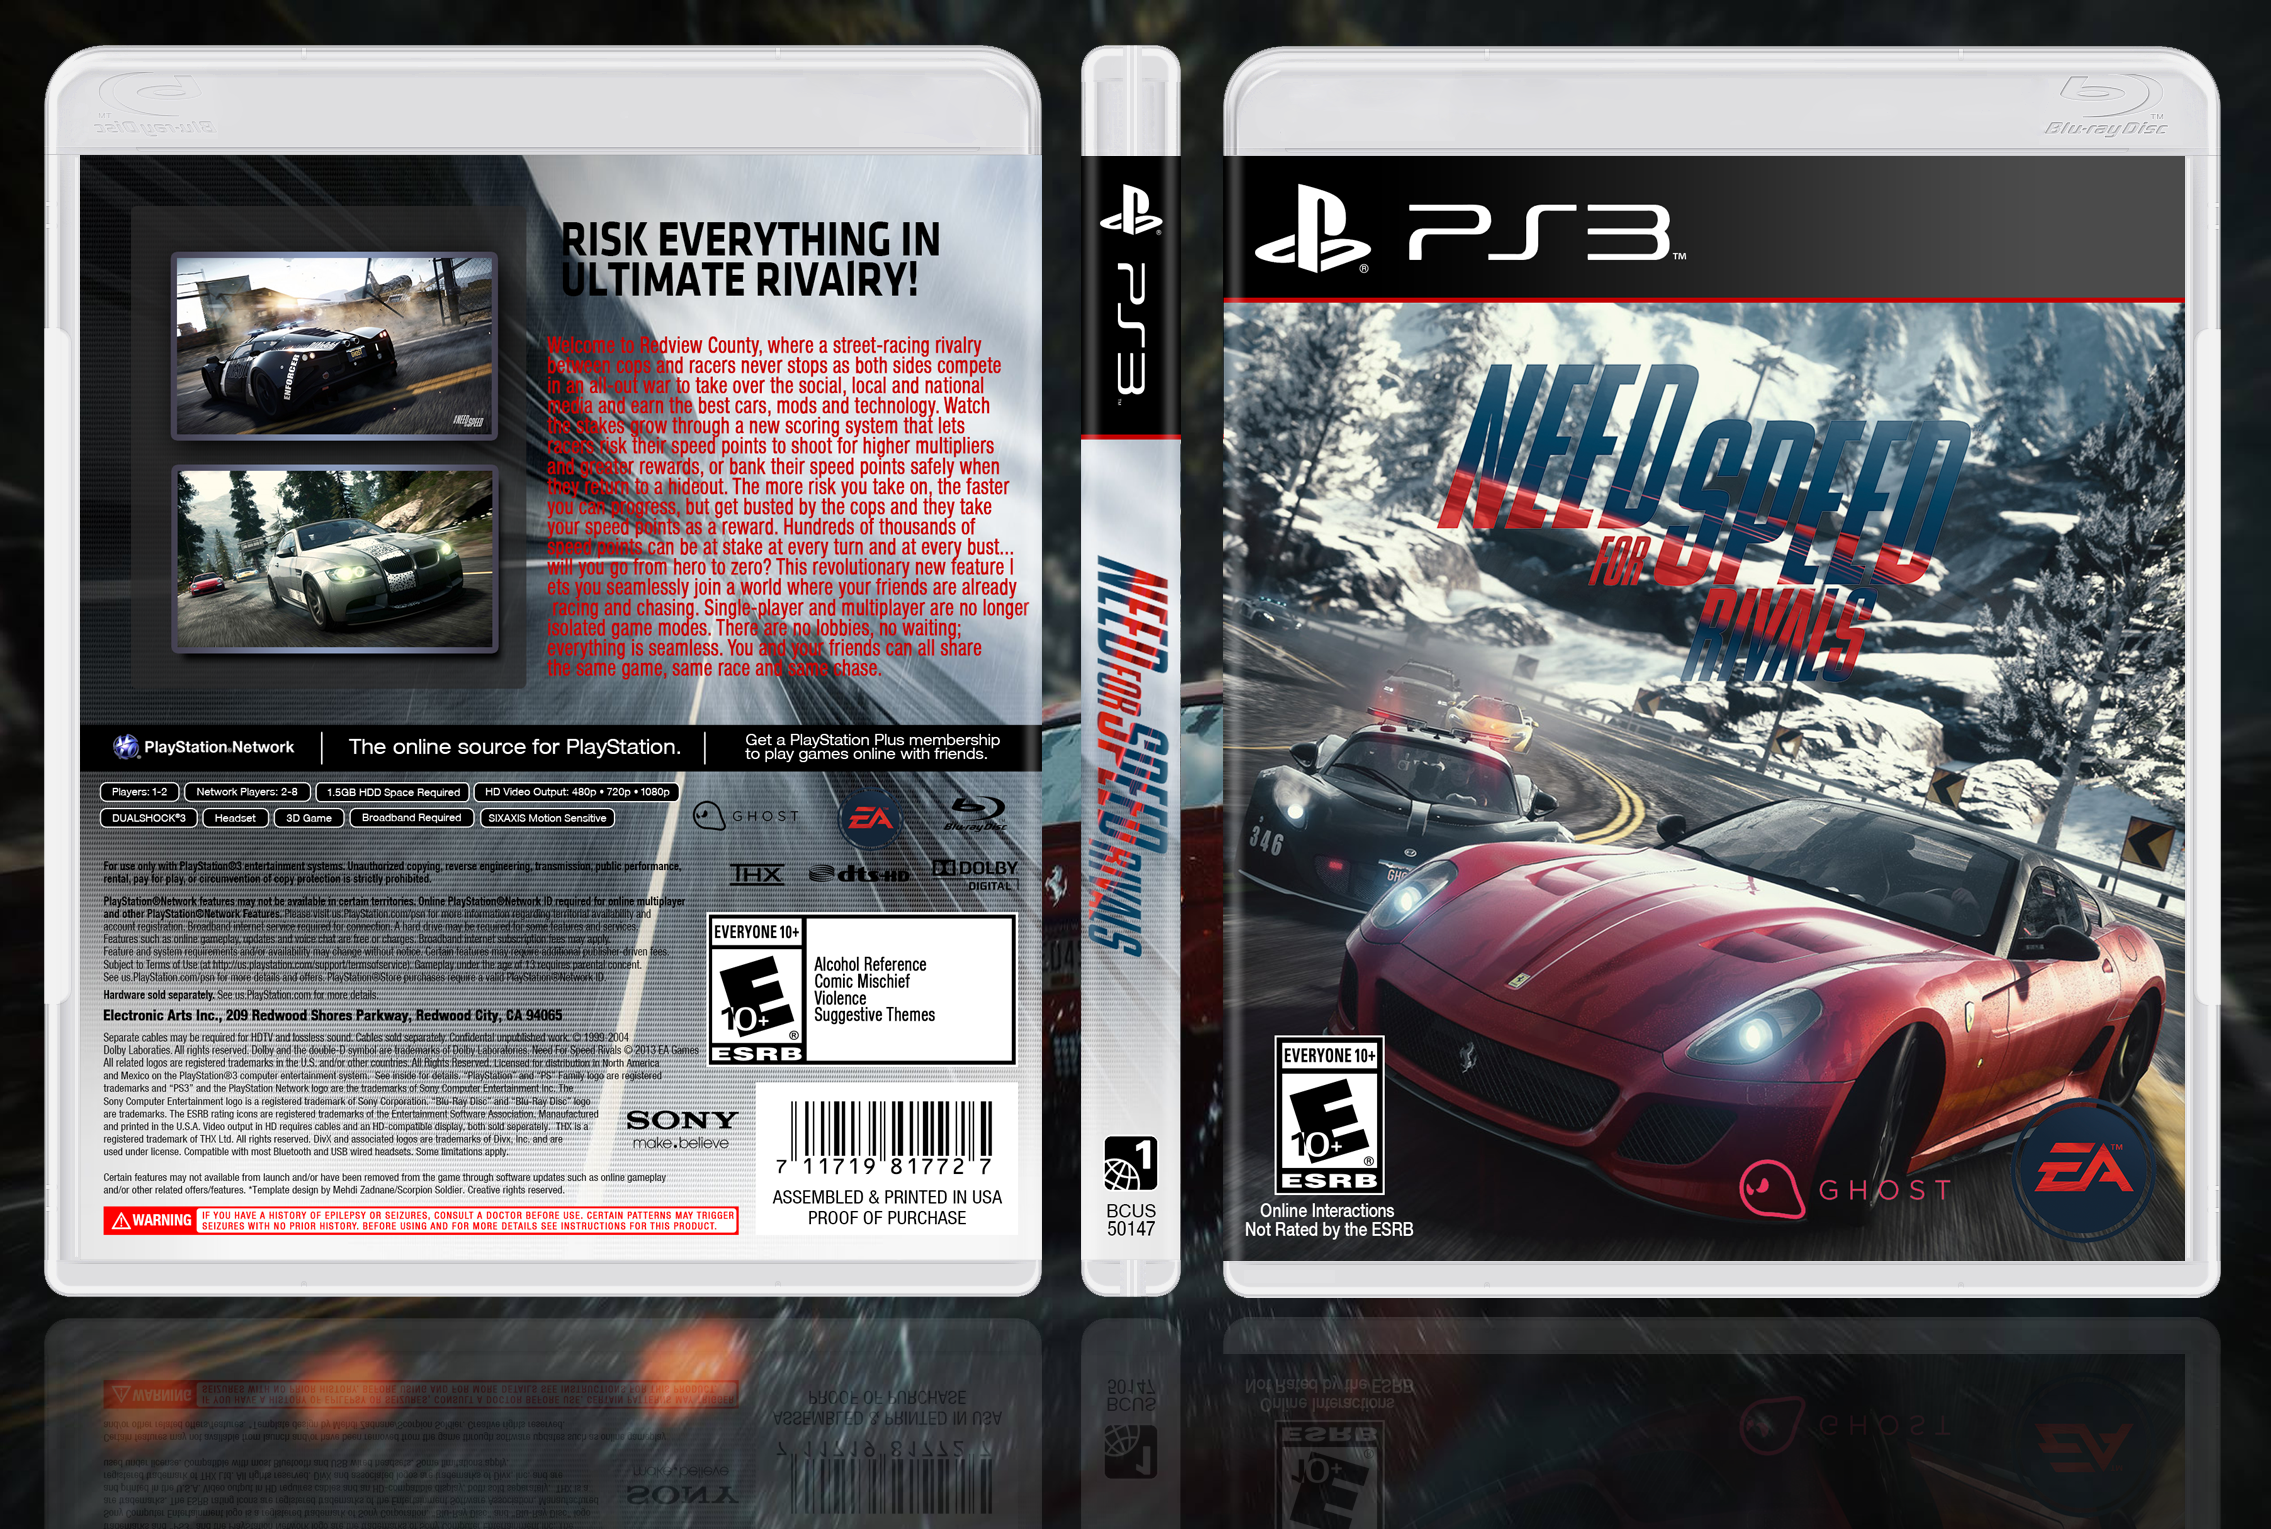 Ps3 диск need for Speed. Ps3 диск need for Speed collection. Need for Speed на ПС 3. Need for Speed Rivals PLAYSTATION 3. Ps3 игры через флешку